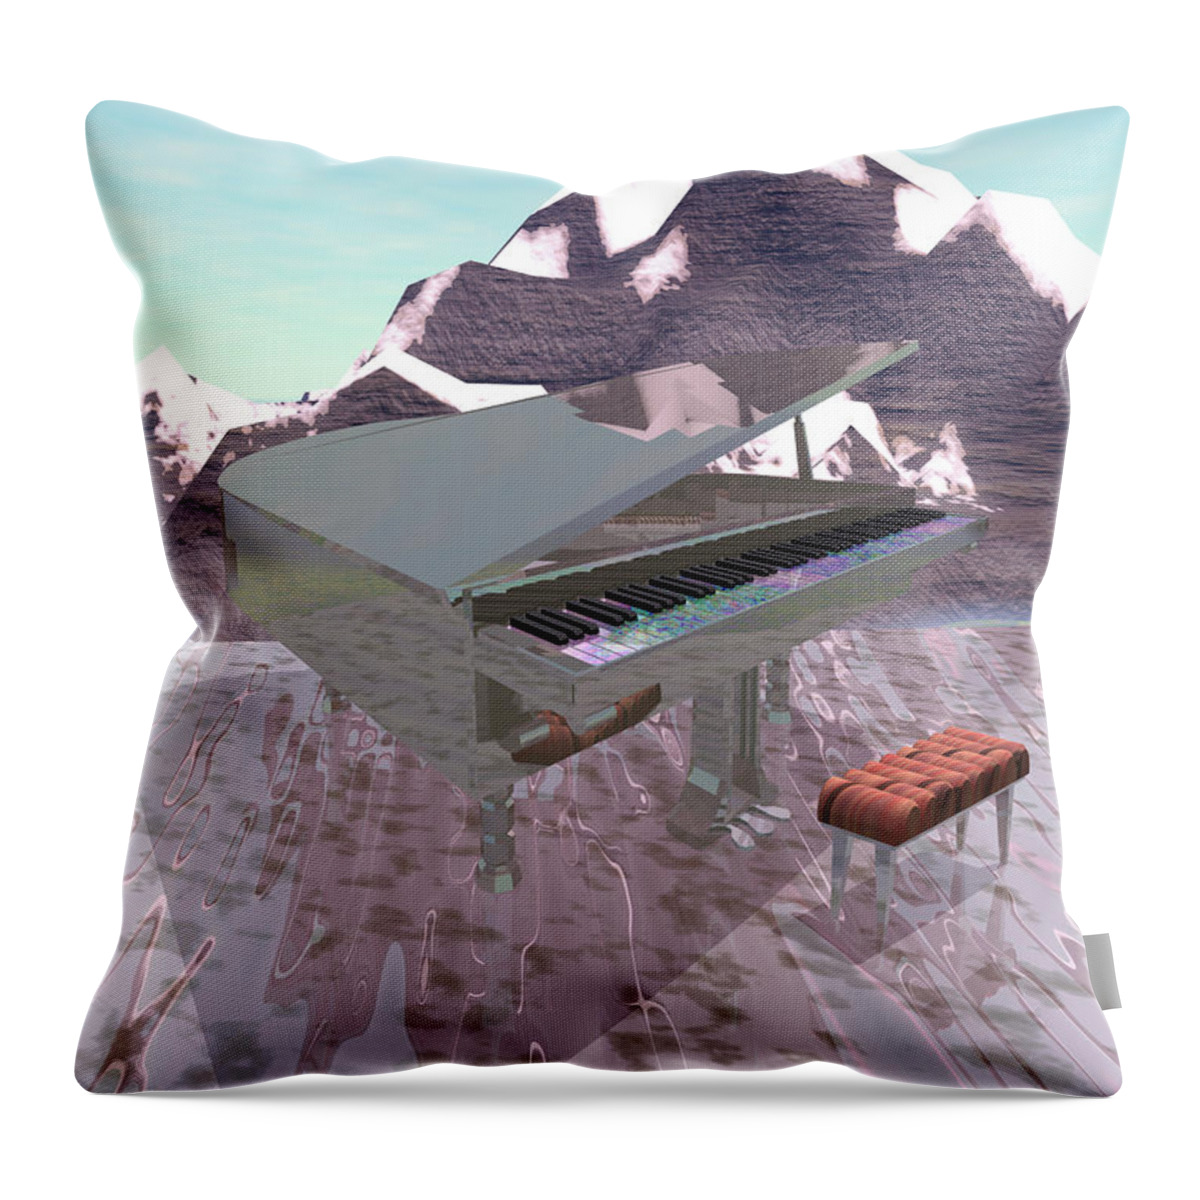 Piano Throw Pillow featuring the digital art Piano Scene by Bernie Sirelson